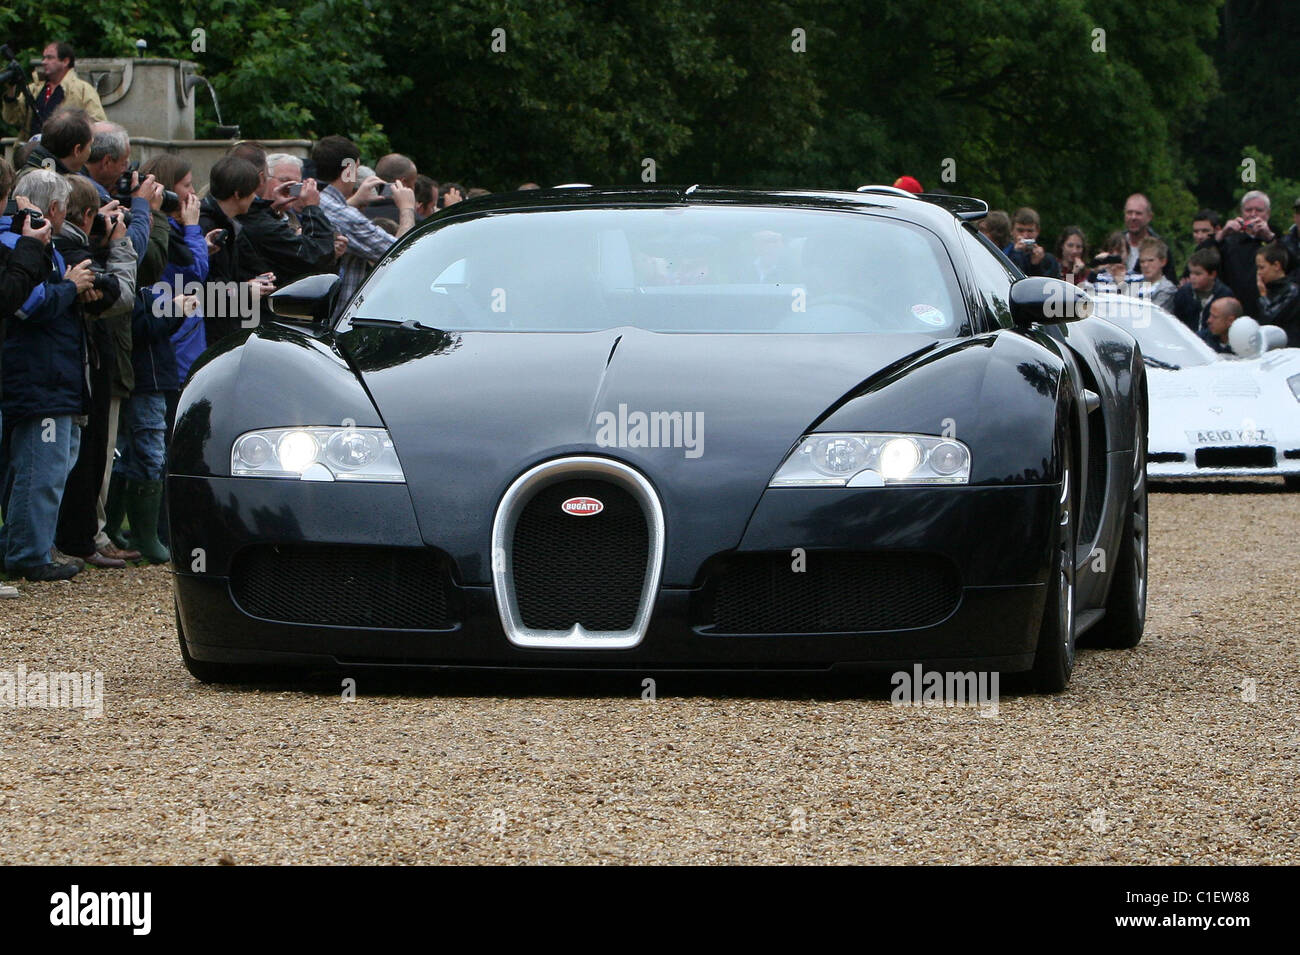 Bugatti Veyron  EB110 16.4 Supercar pleases the crowds at a Wiltshire Car Show UK. Stock Photo